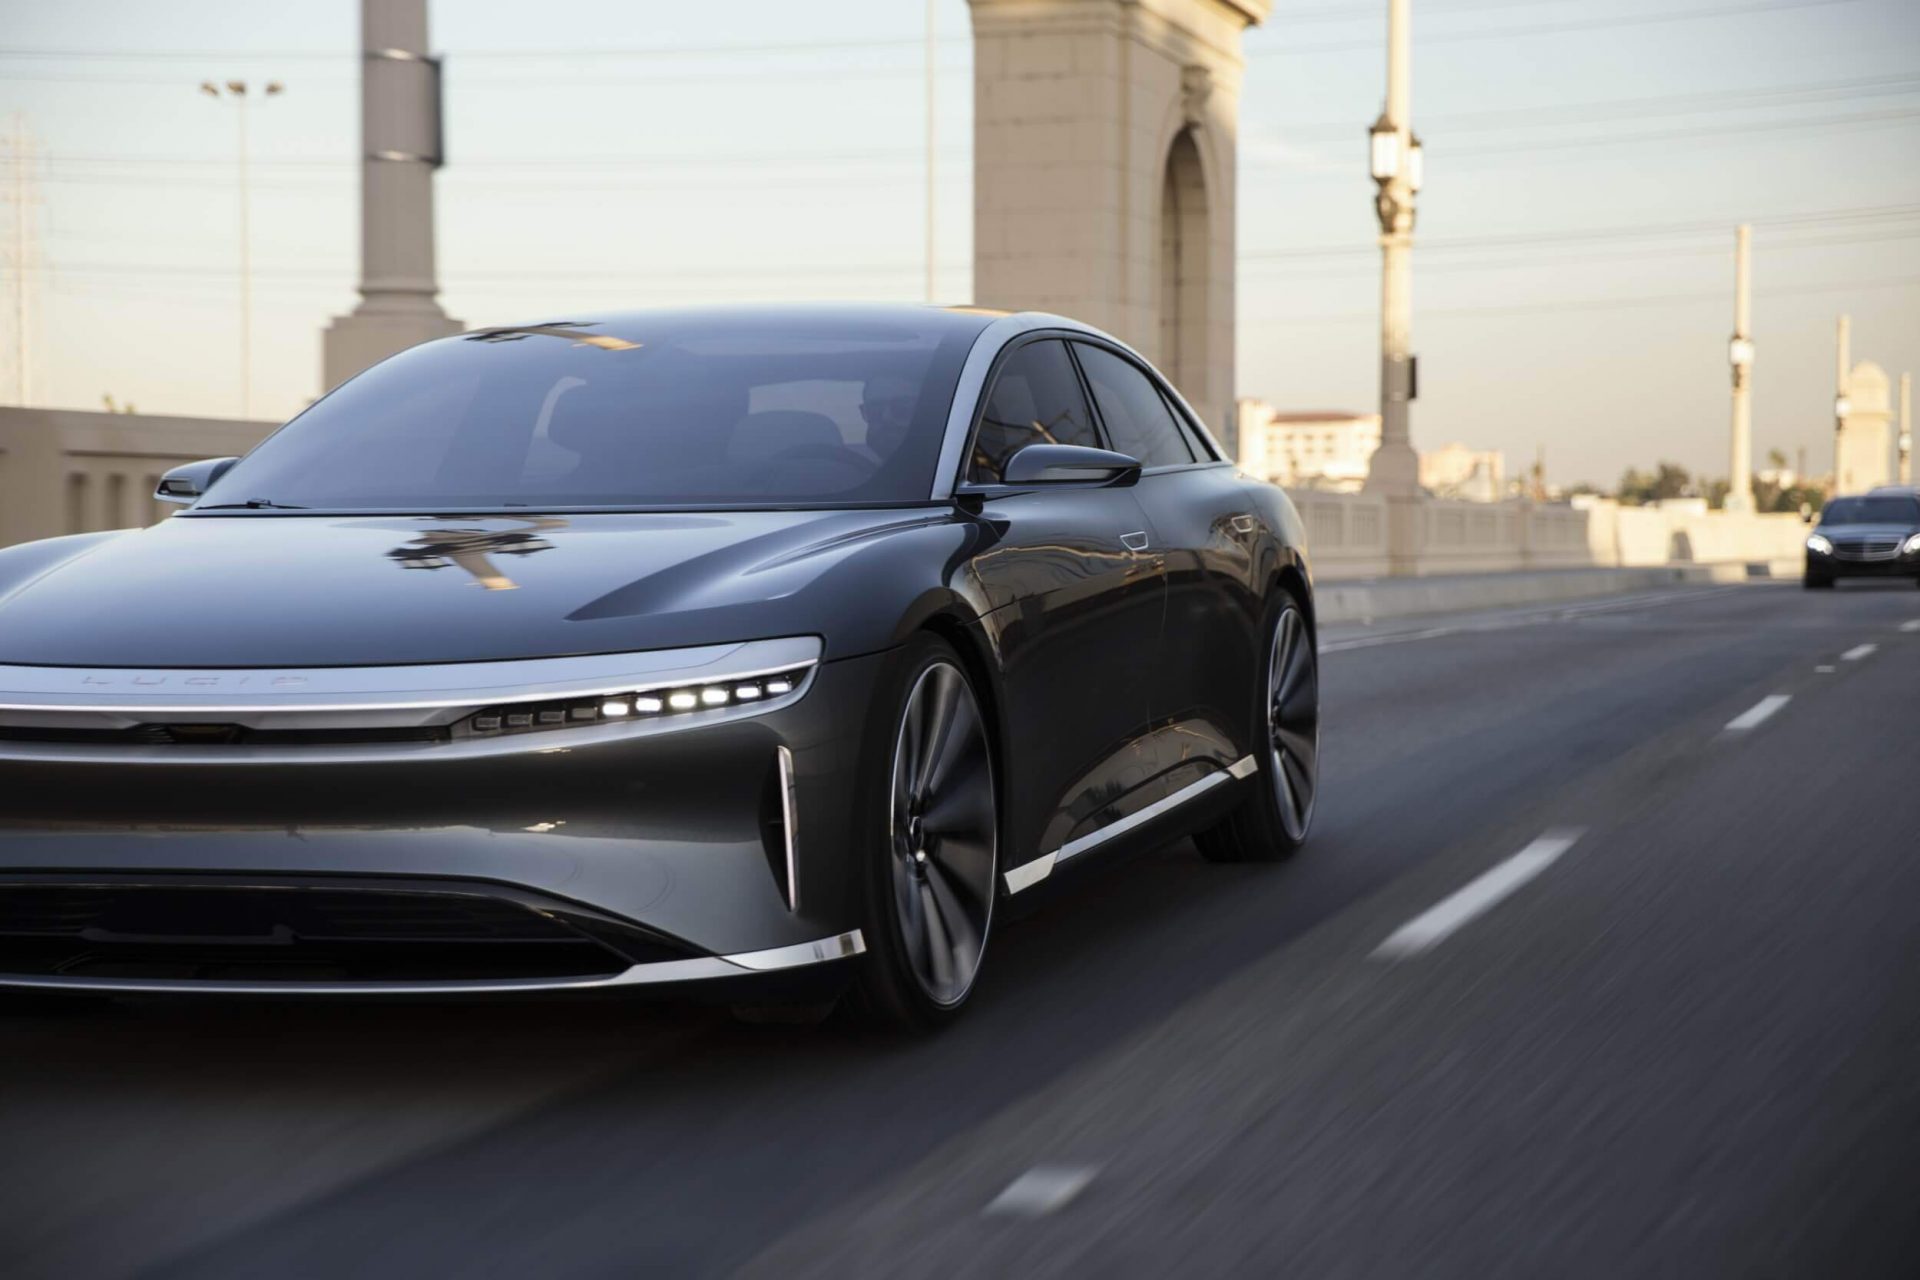 Lucid Motors says its all-electrical Air sedan can possess a vary of 517 miles